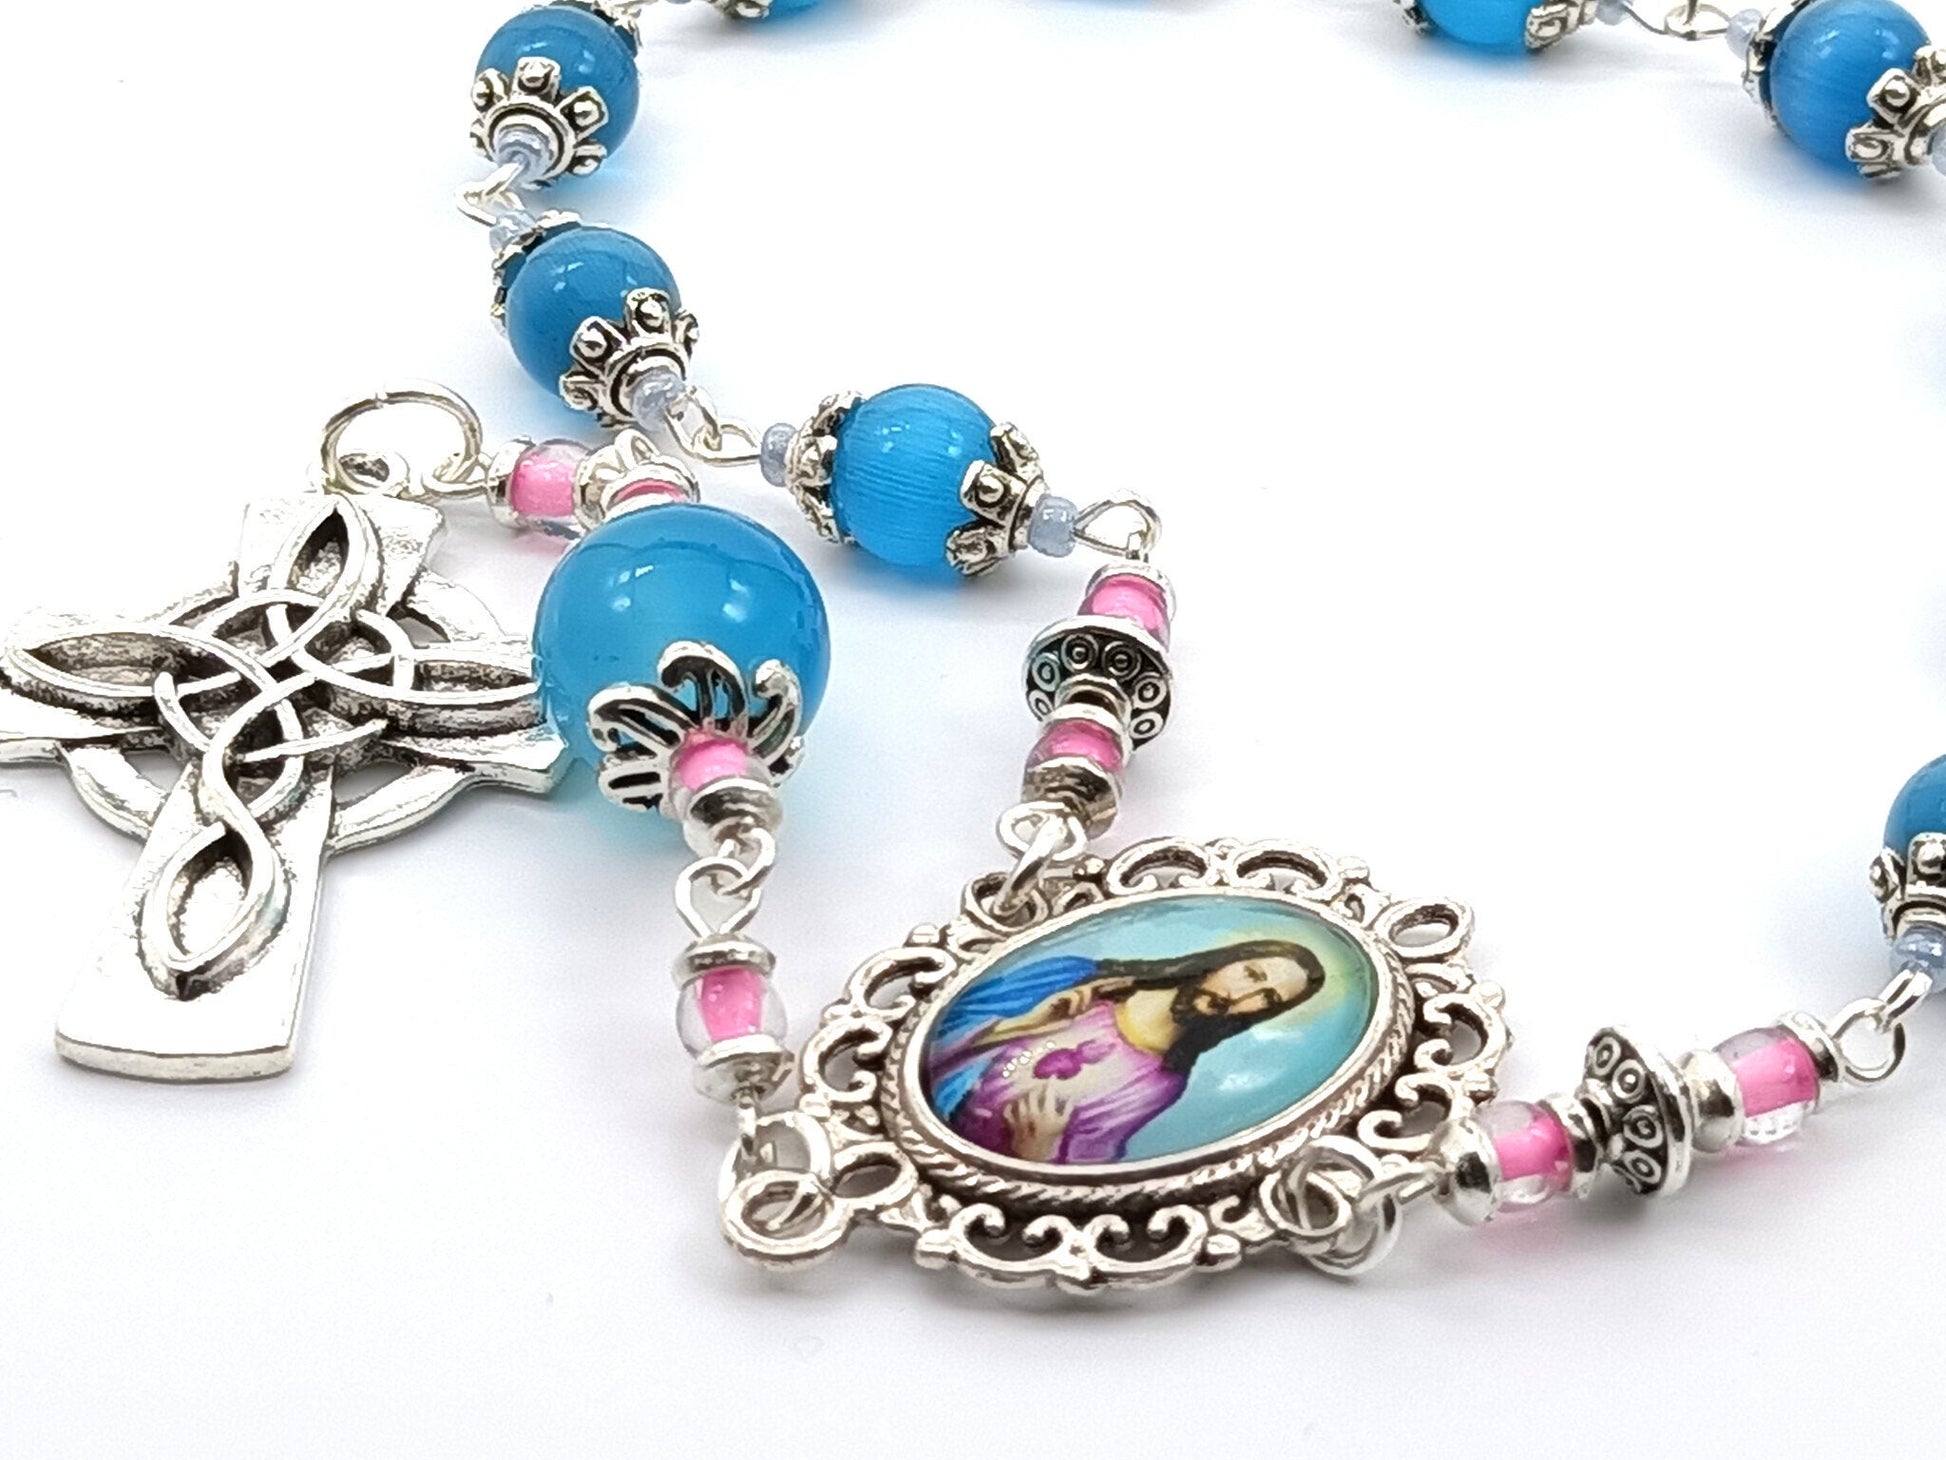 Sacred Heart unique rosary beads single decade with blue cats eyes glass beads and silver Celtic cross.